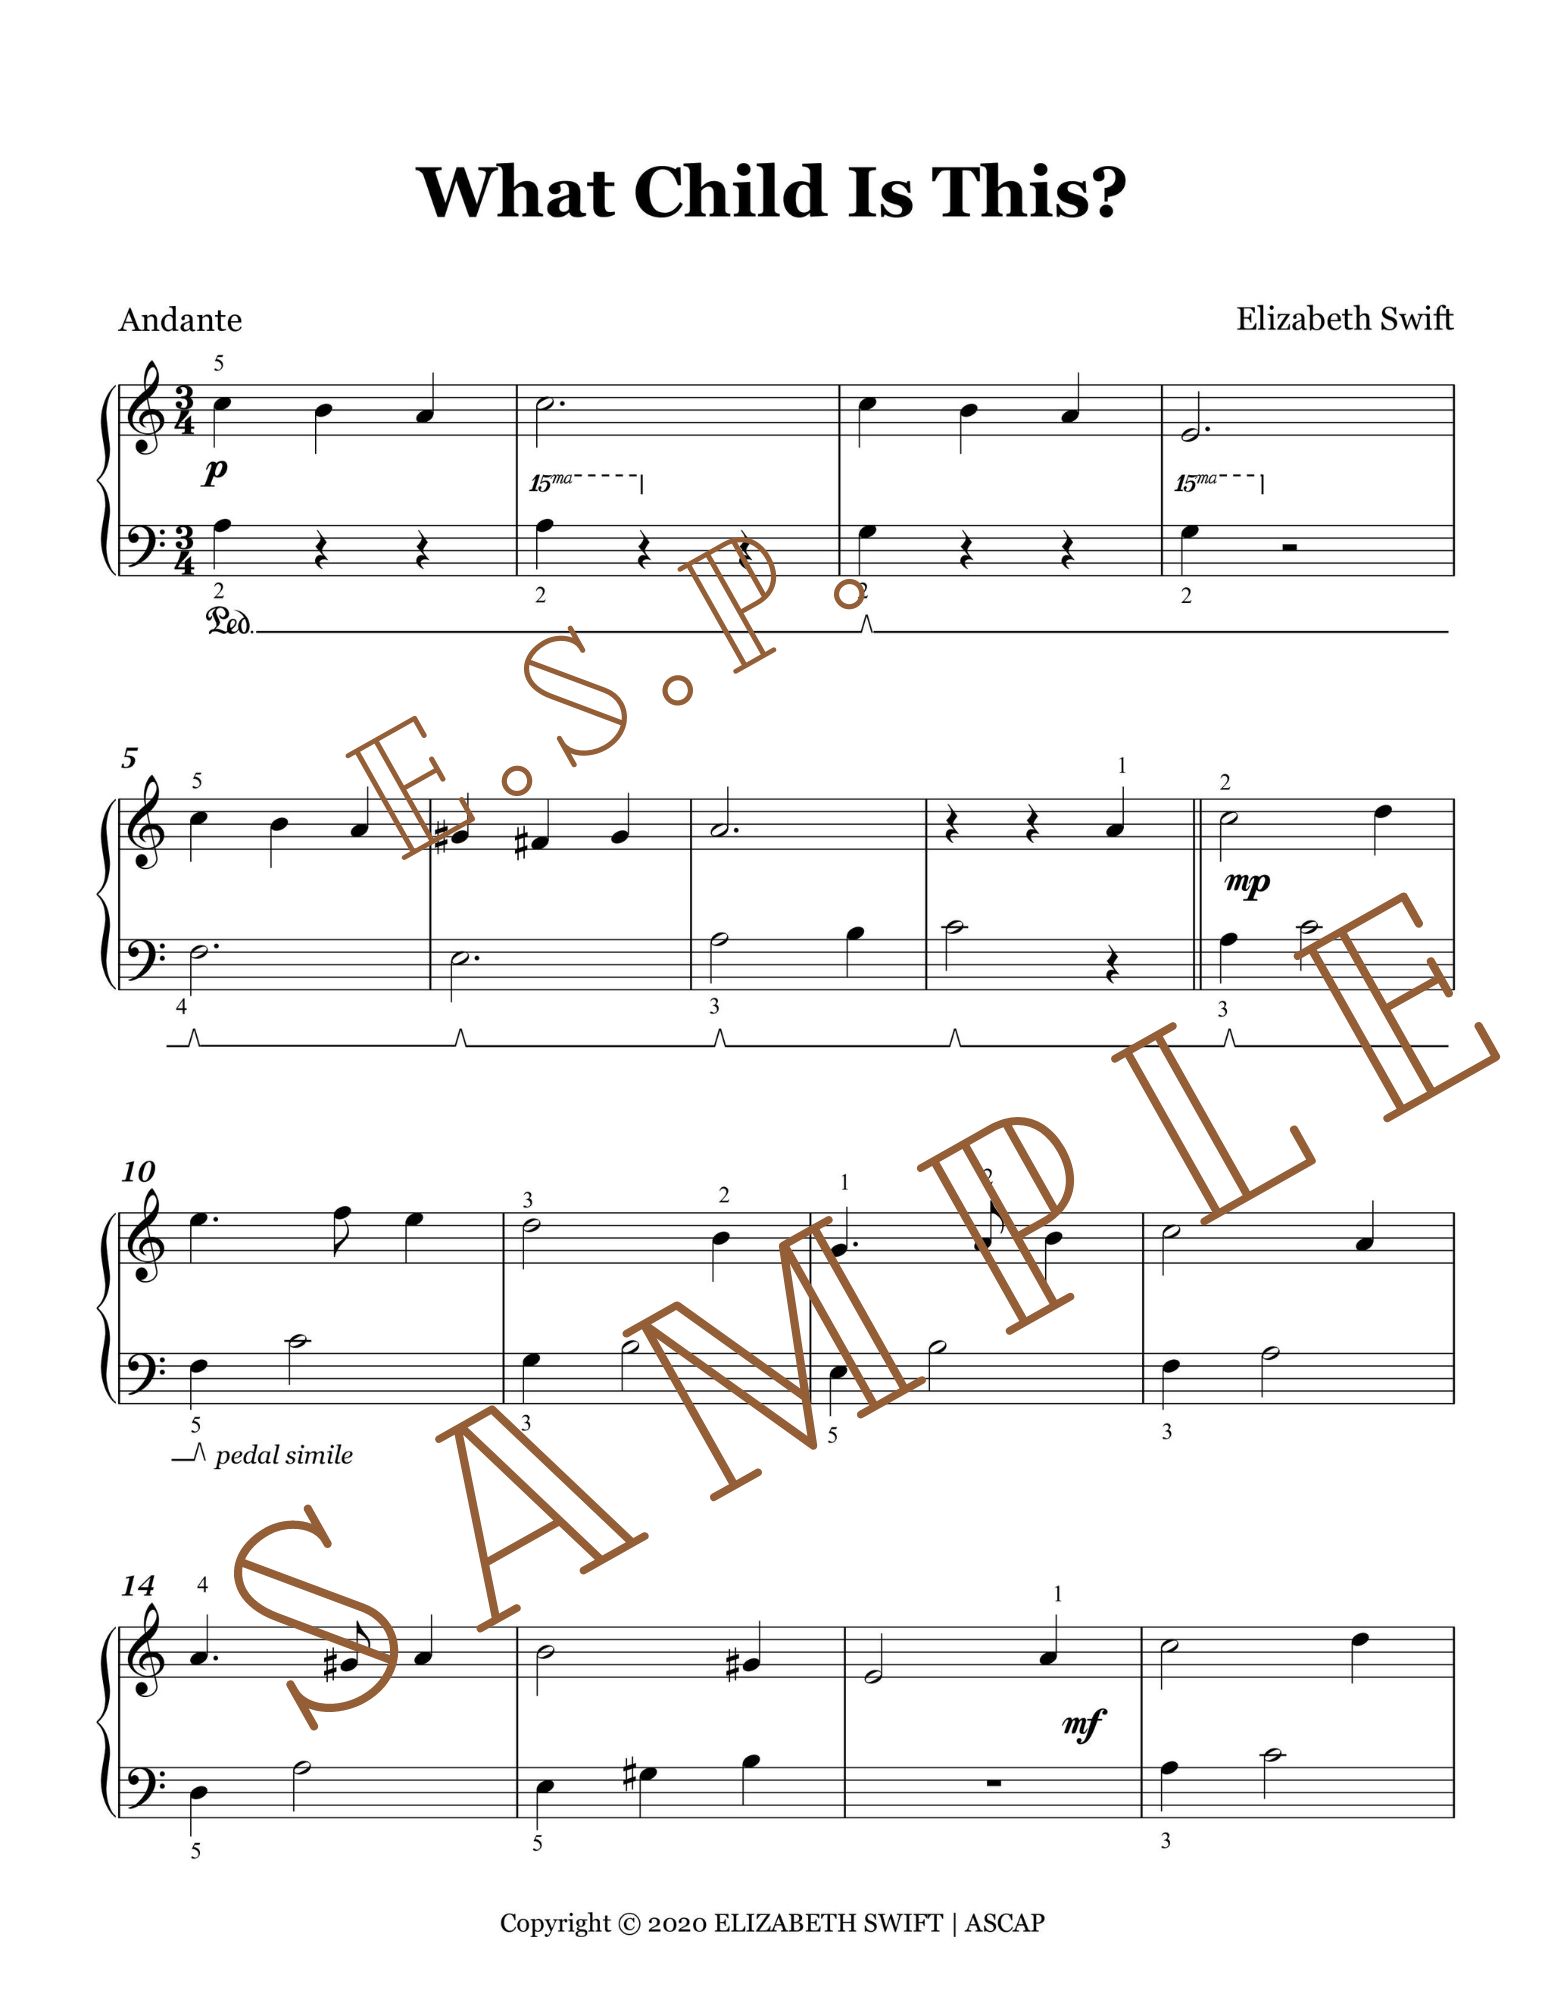 What Child Is This? Sheet Music Bundle Elementary-Early Intermediate-Intermediate Piano